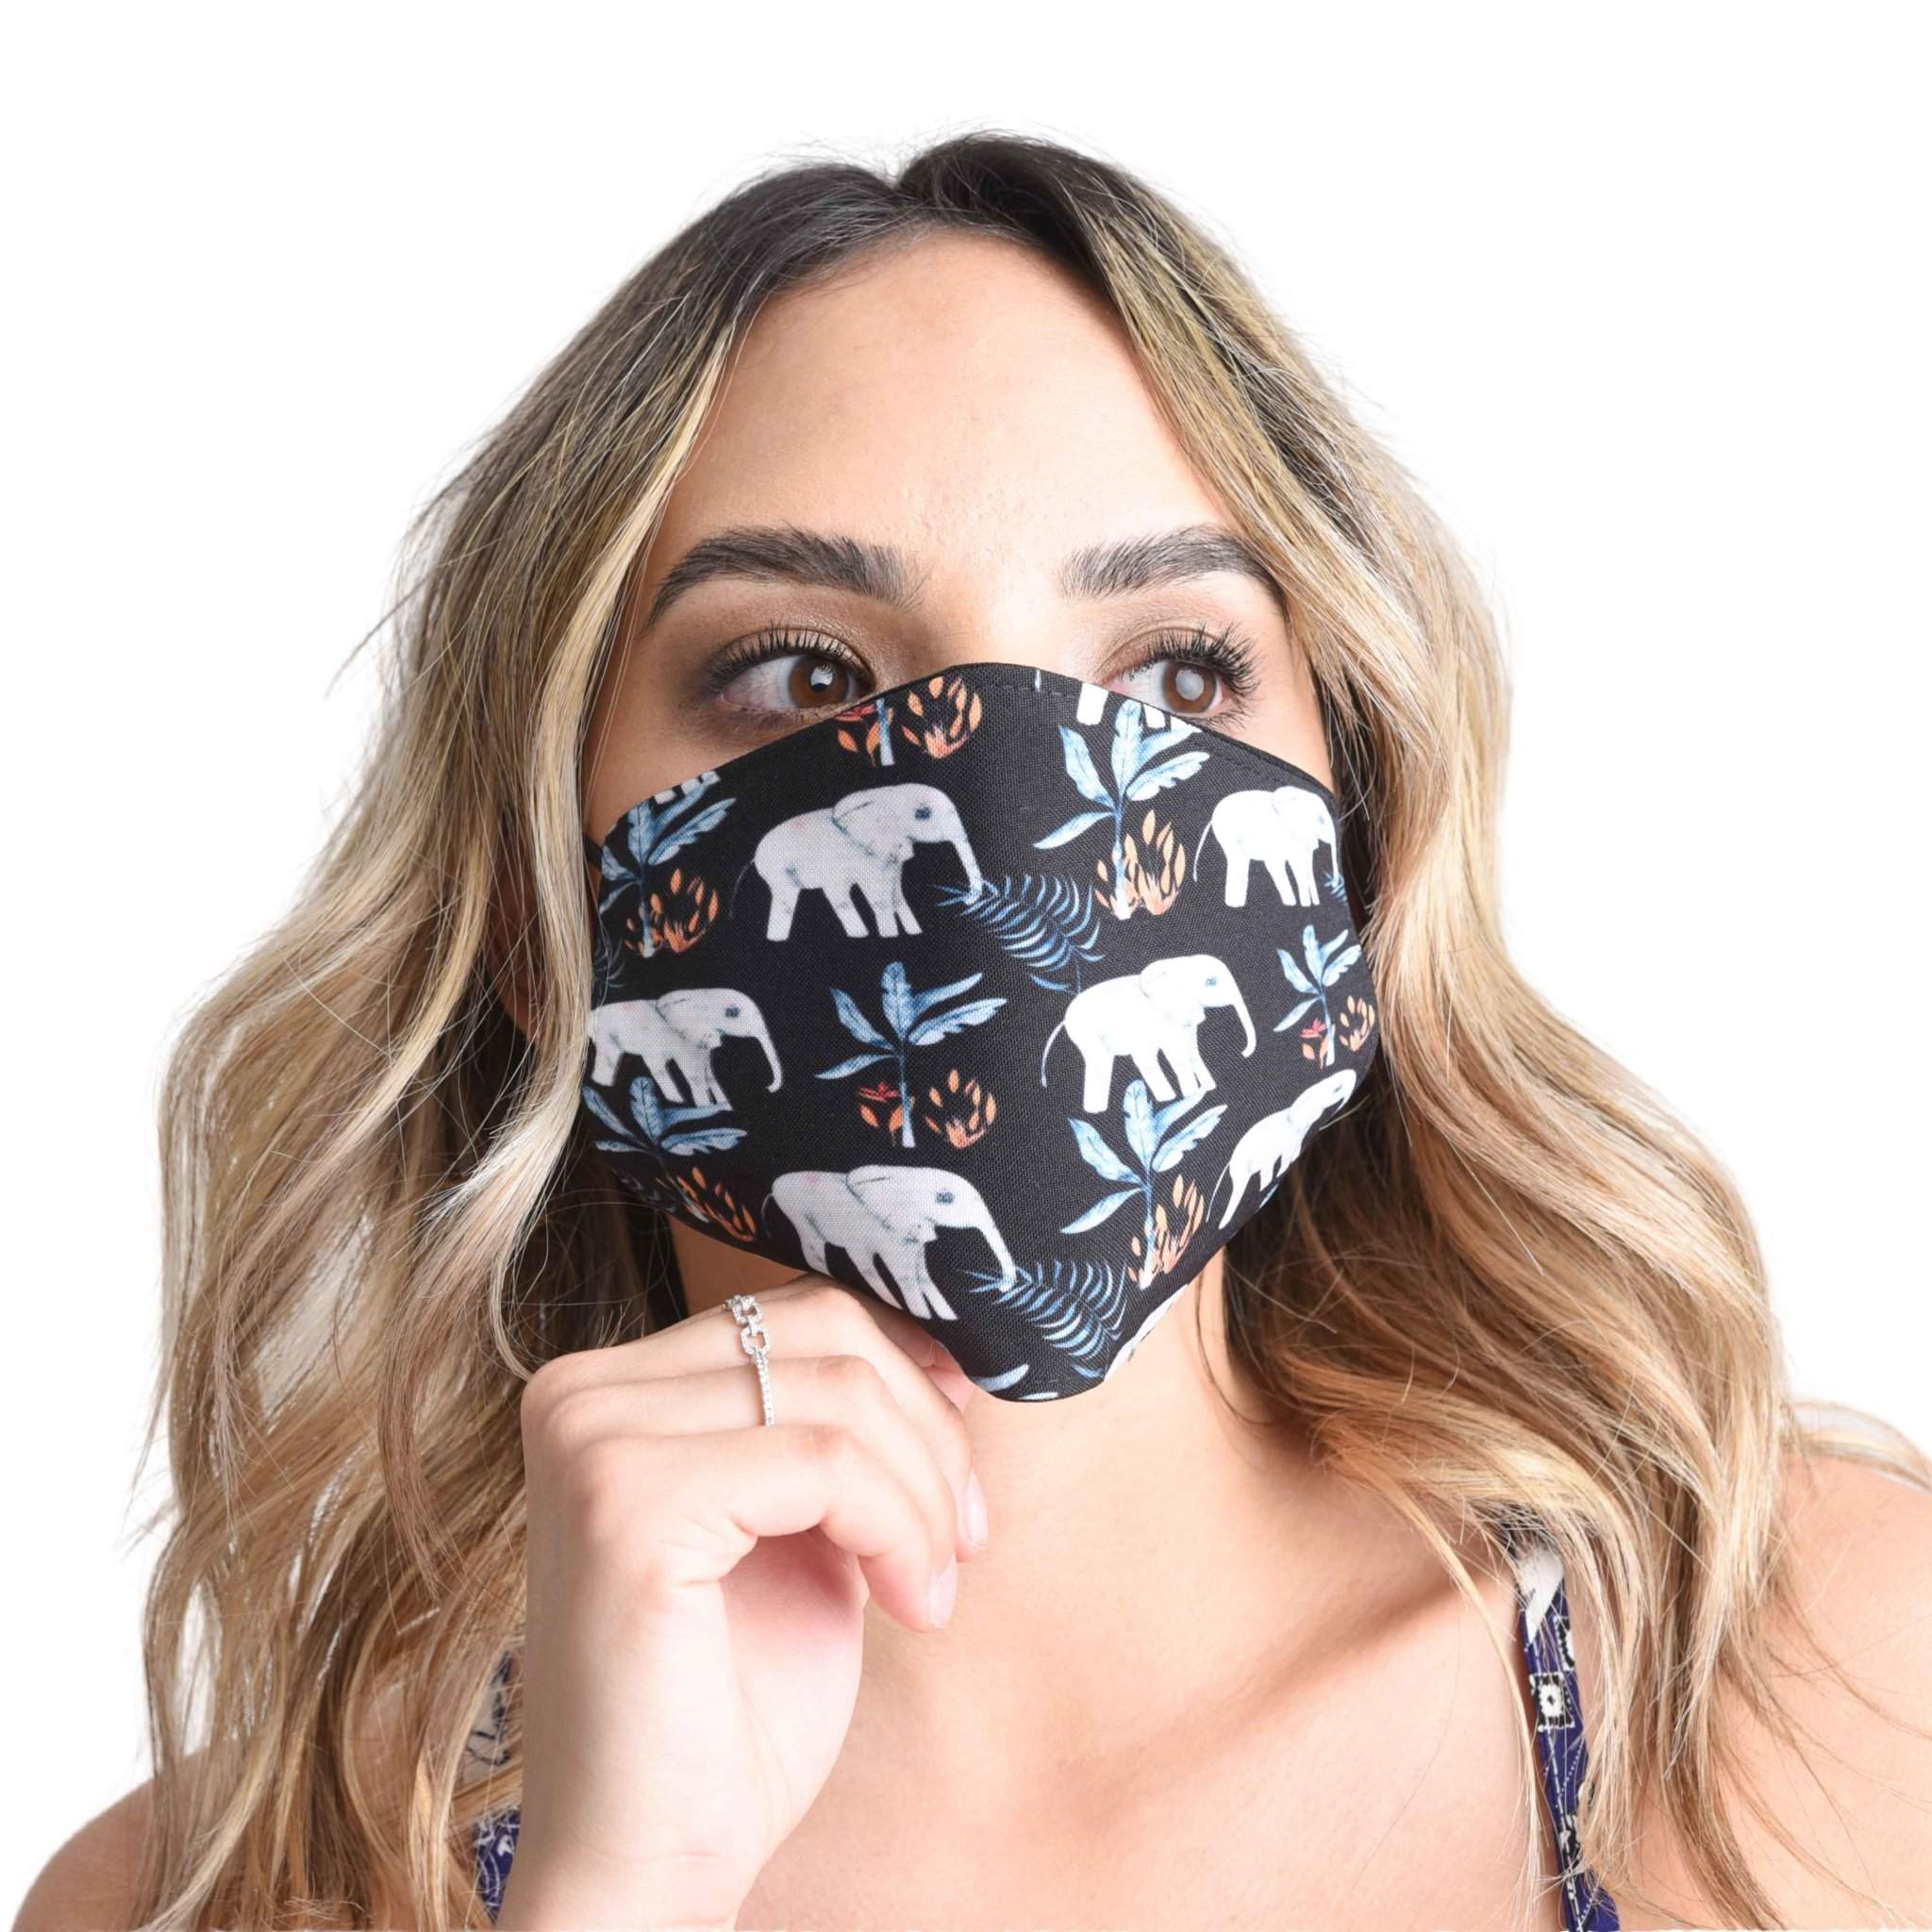 FACE MASK - Black Elepanta Face Masks - Buy Today Elephant Pants Jewelry And Bohemian Clothes Handmade In Thailand Help To Save The Elephants FairTrade And Vegan